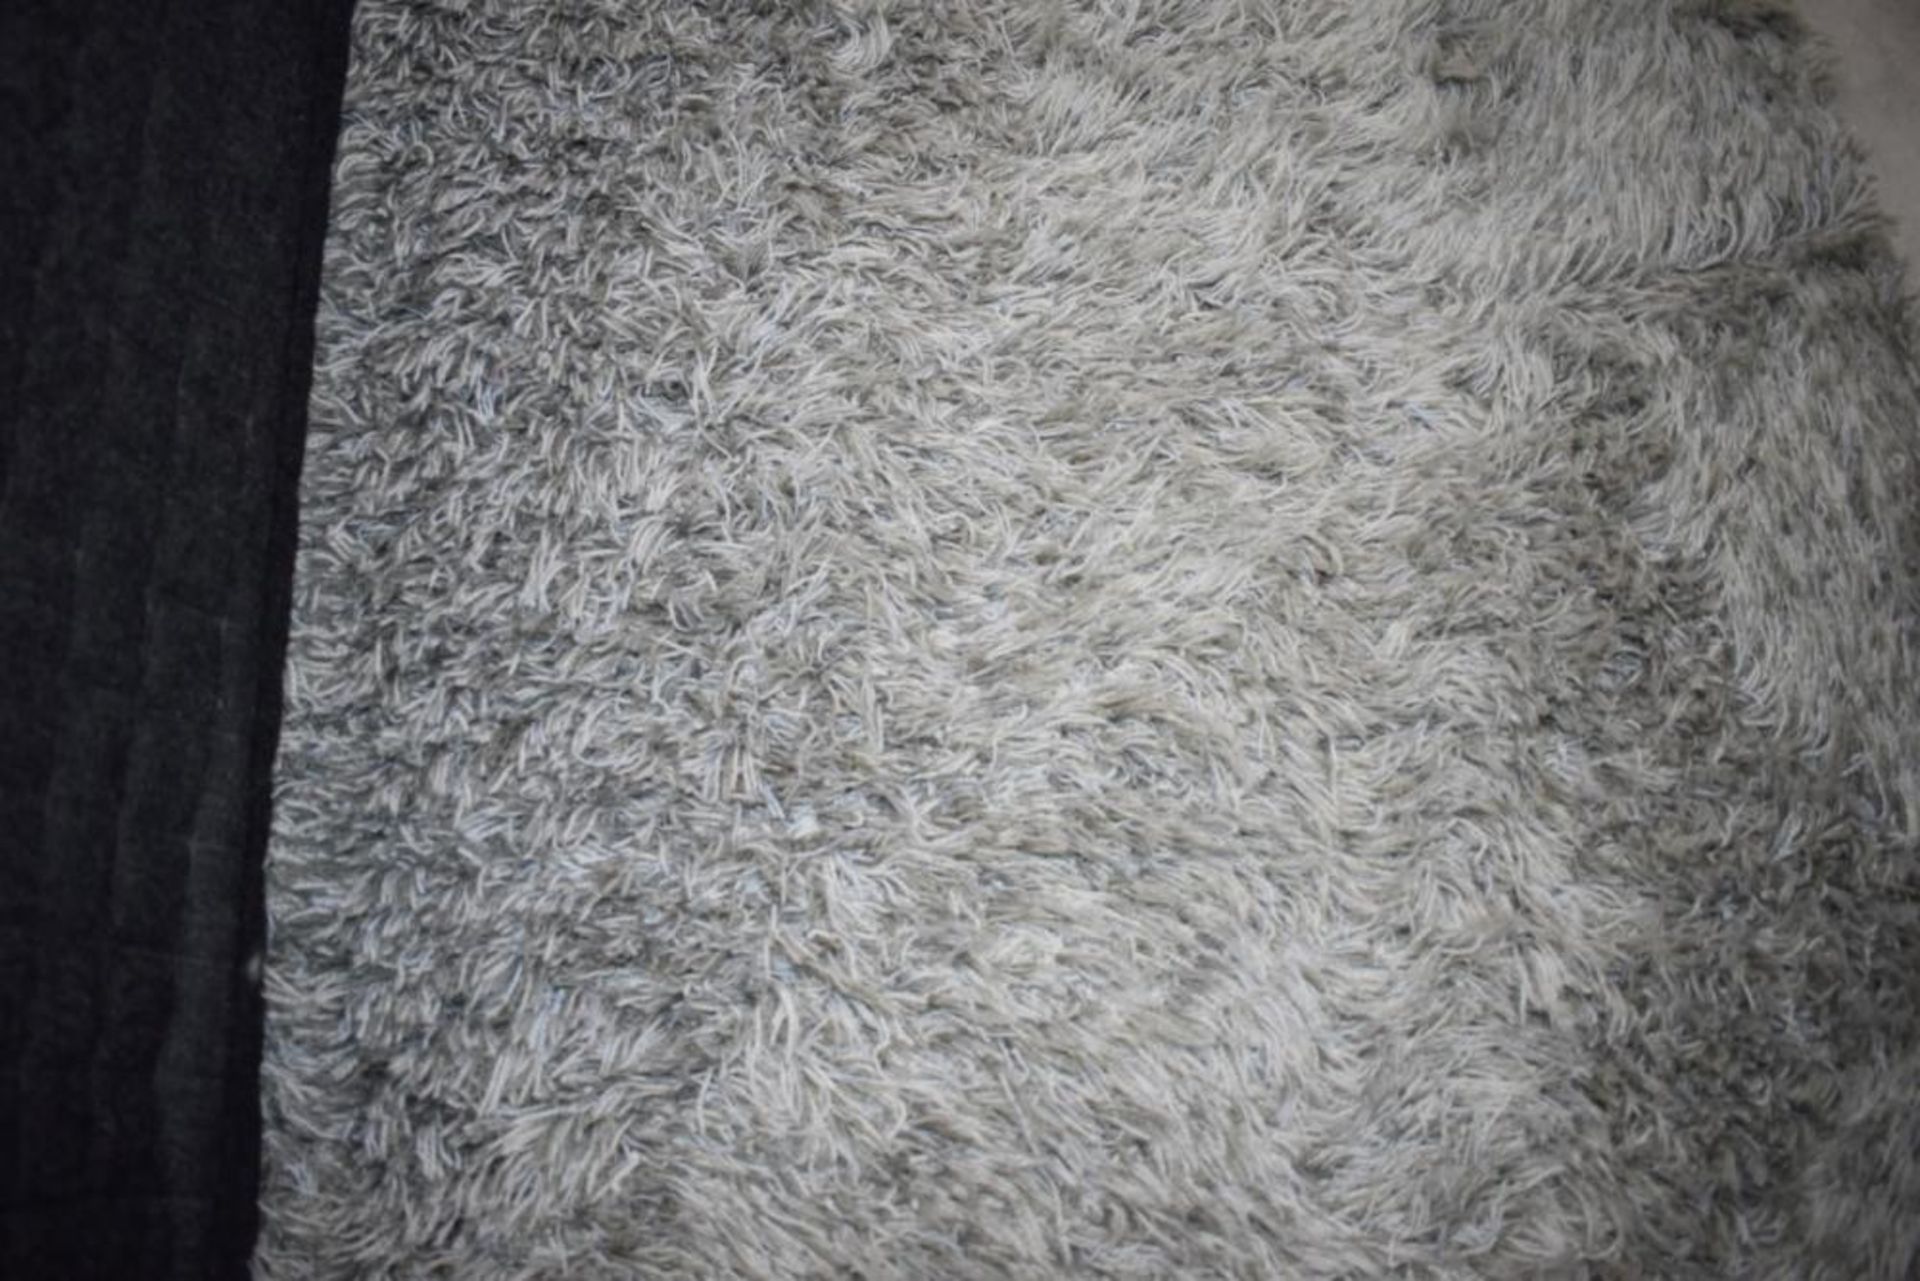 1 x High Quality Bedroom Rug In Grey - Dimensions (approx): 250 x 175cm - Ref: ABR055 / BR - CL491 * - Image 2 of 3